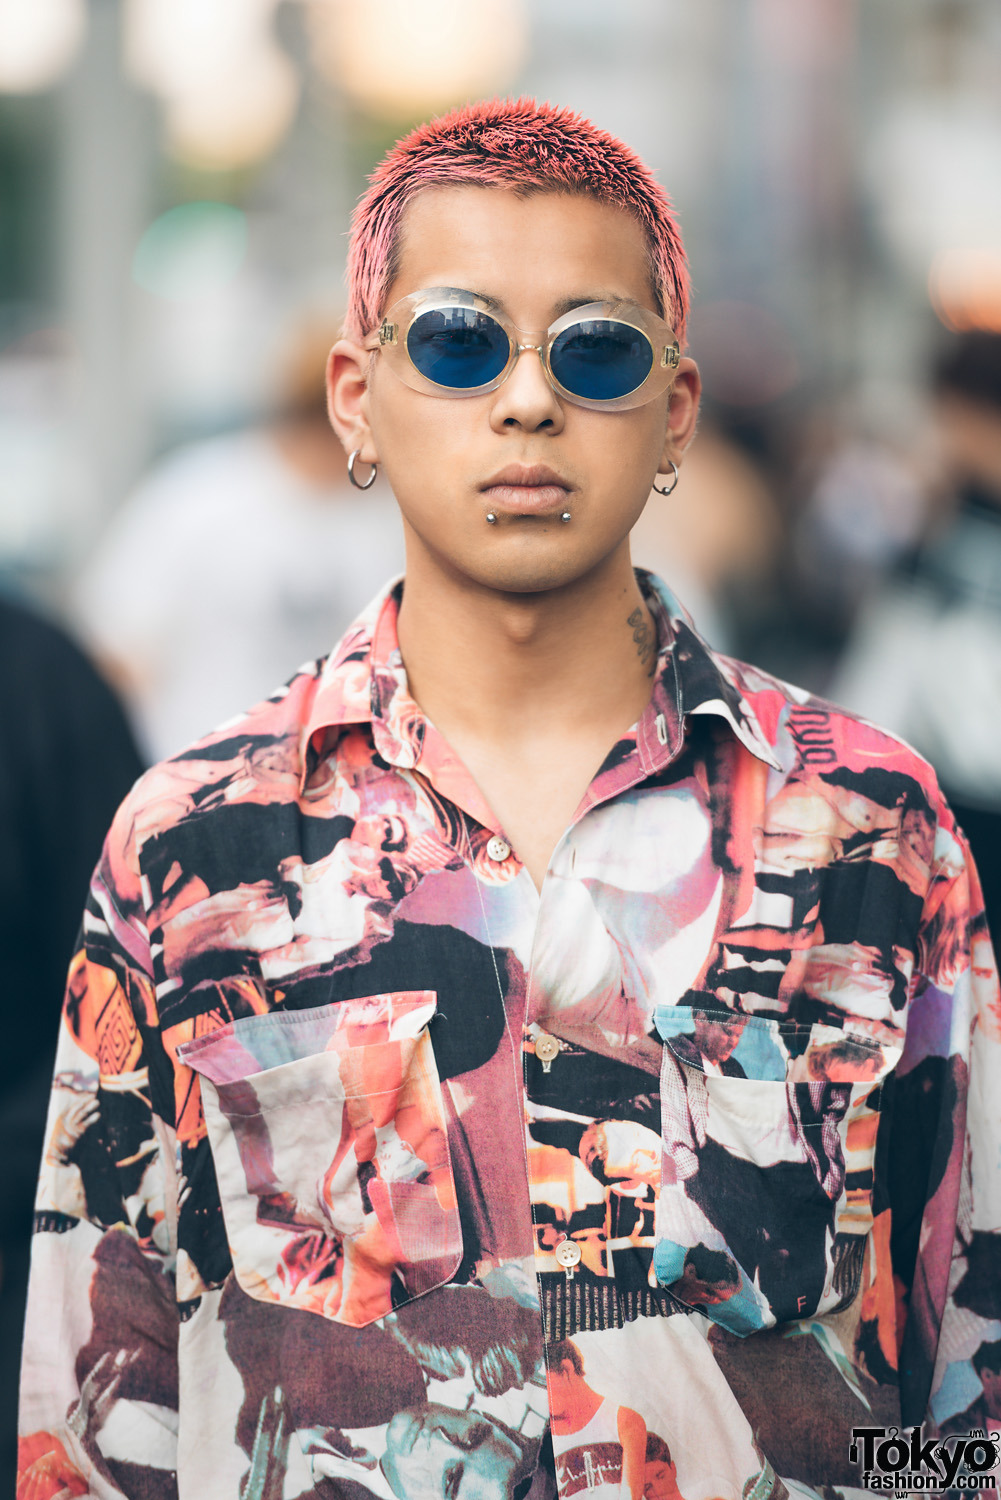 tokyo-fashion: 23-year-old Yuuta on the street in Harajuku wearing a vintage button